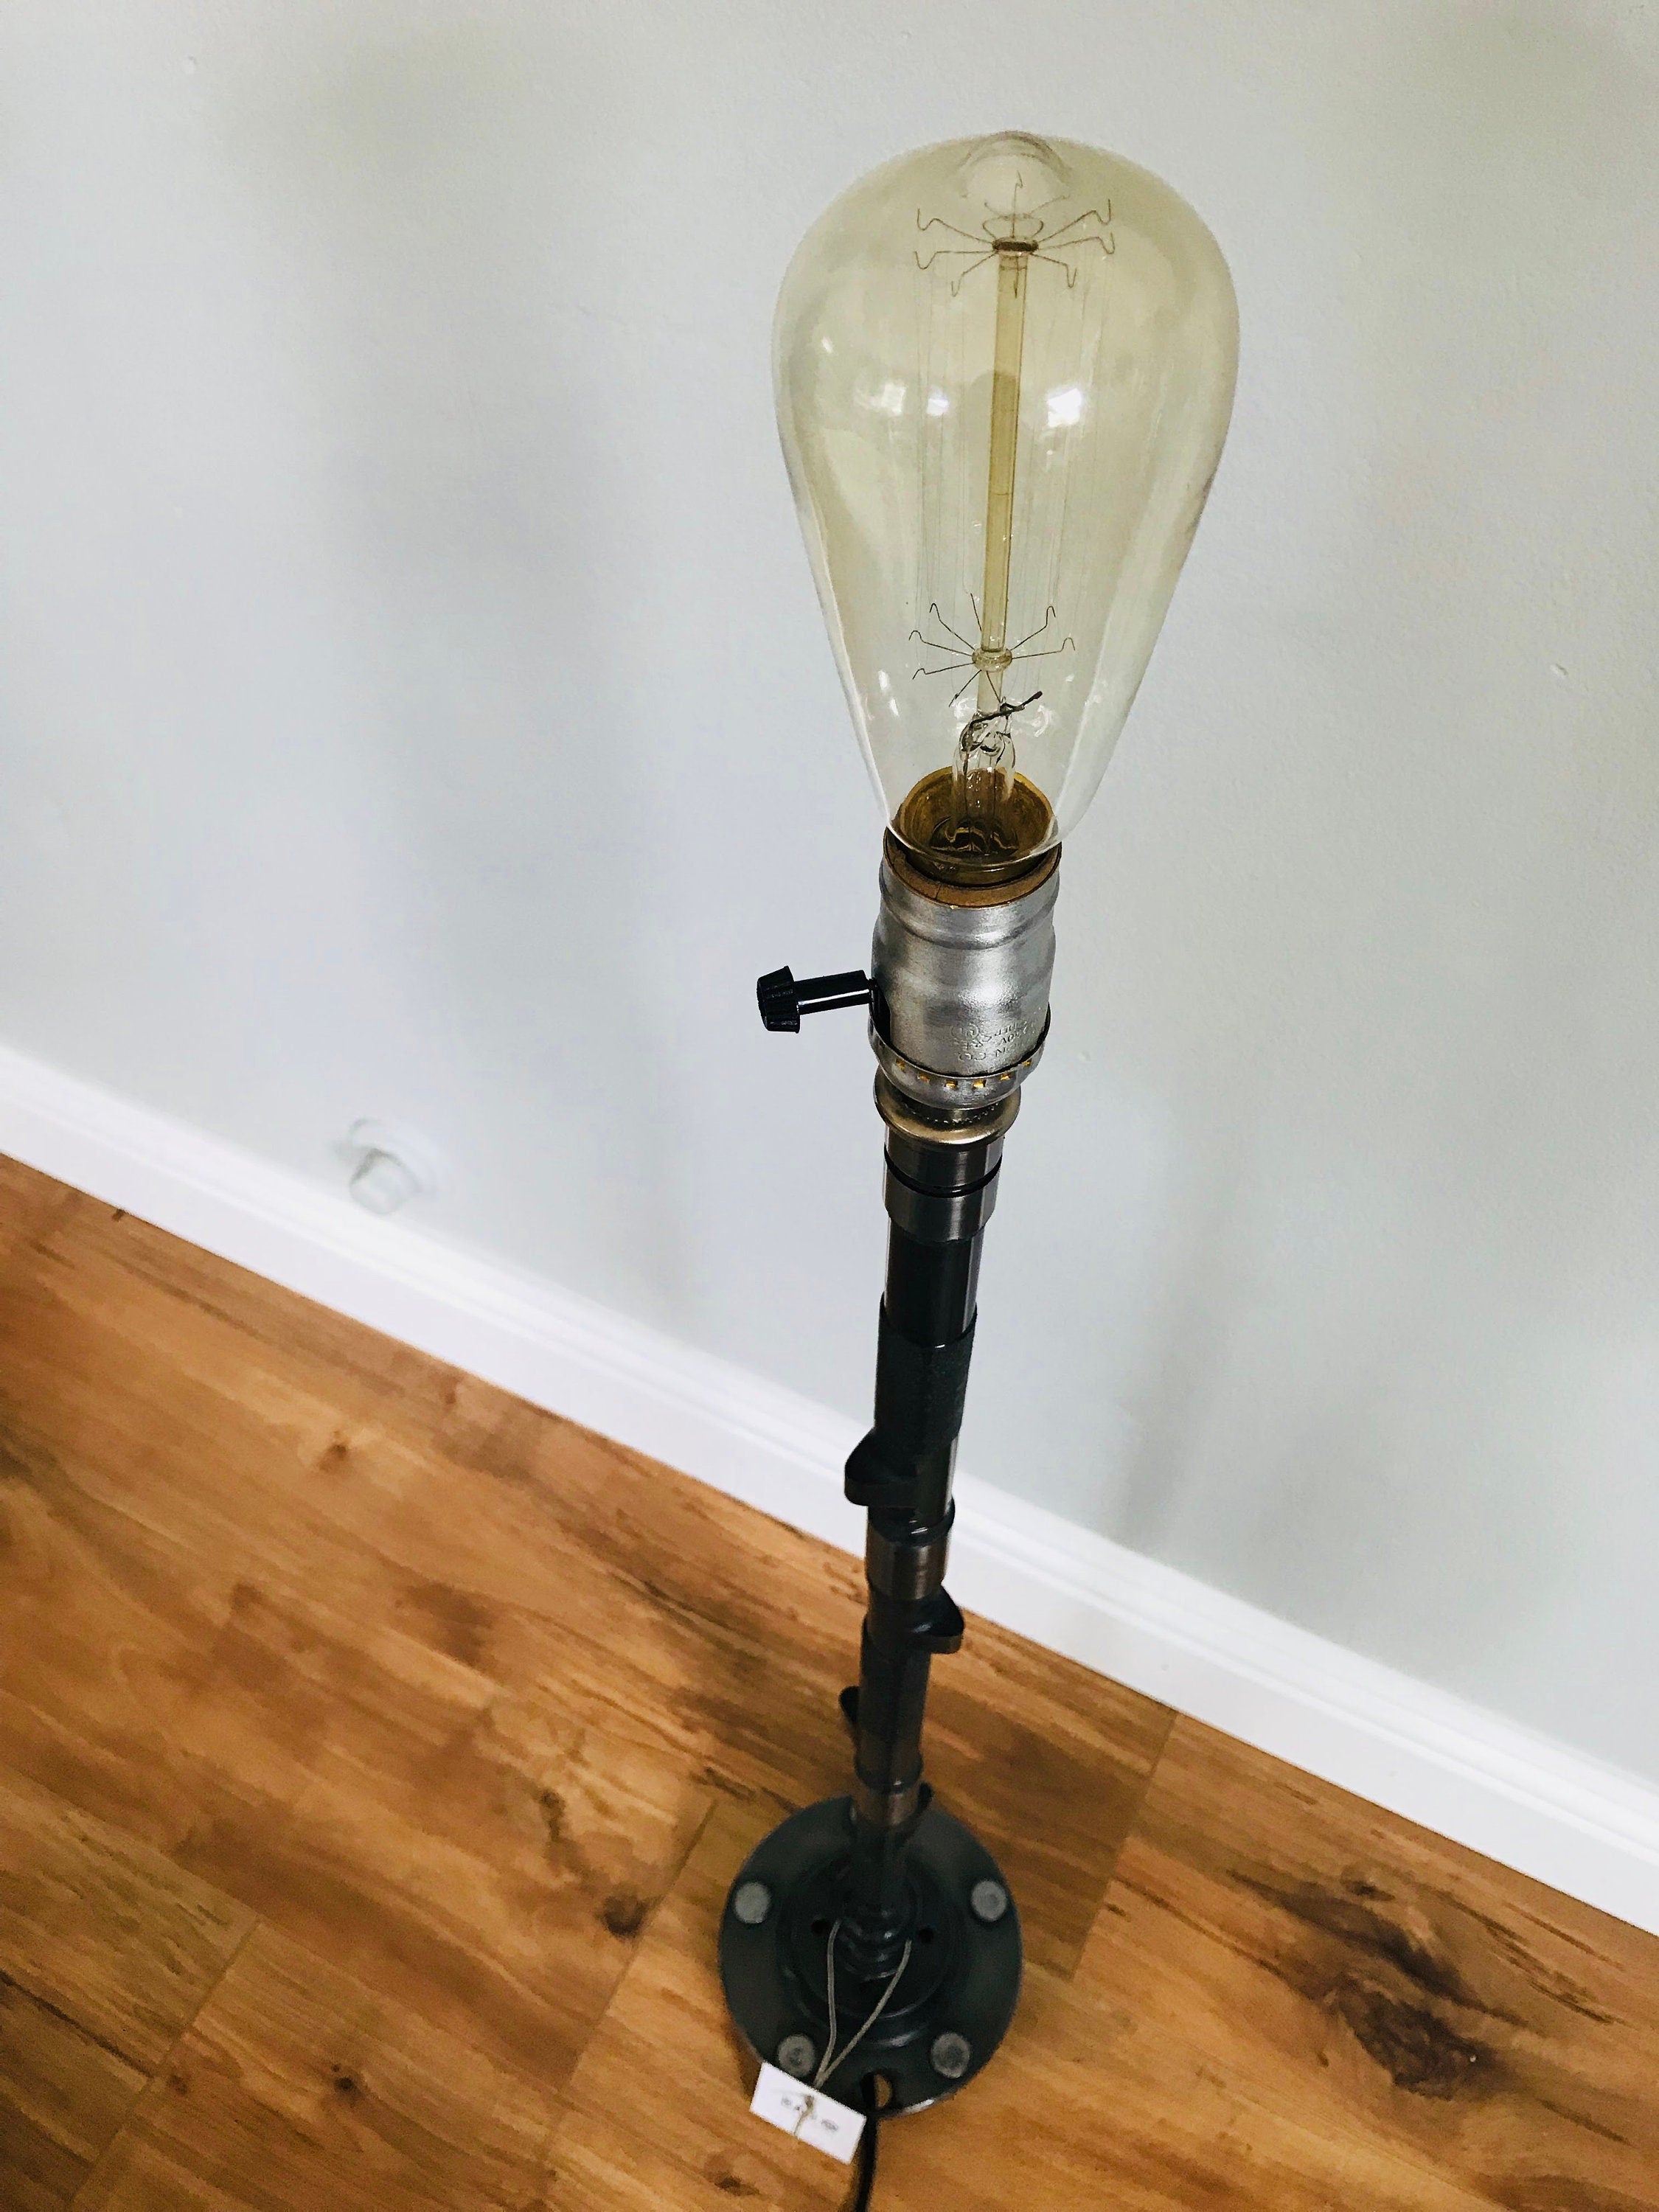 Lamp made out of a car's camshaft without its shade.